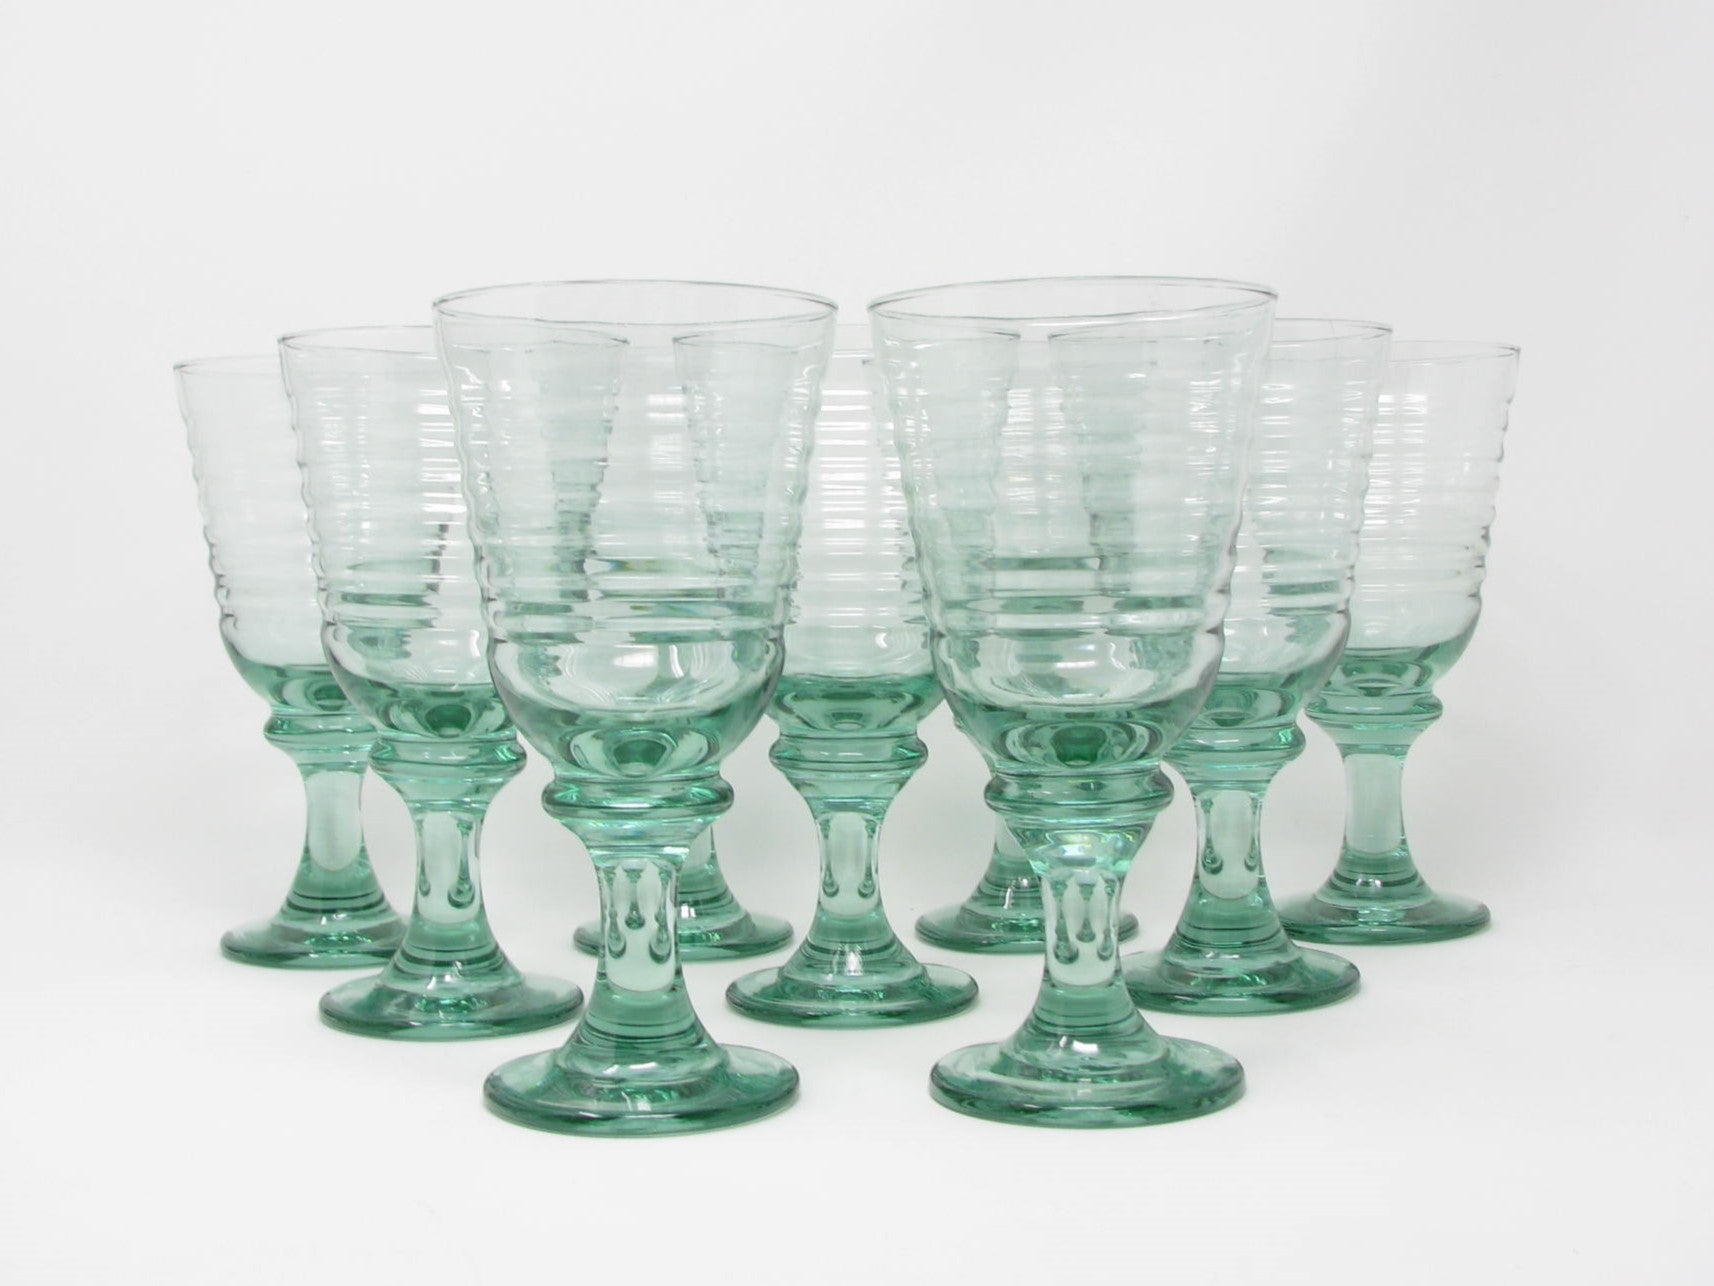 edgebrookhouse - Vintage Sirrus Spanish Green Glass Water Goblets by Libbey - 9 Pieces